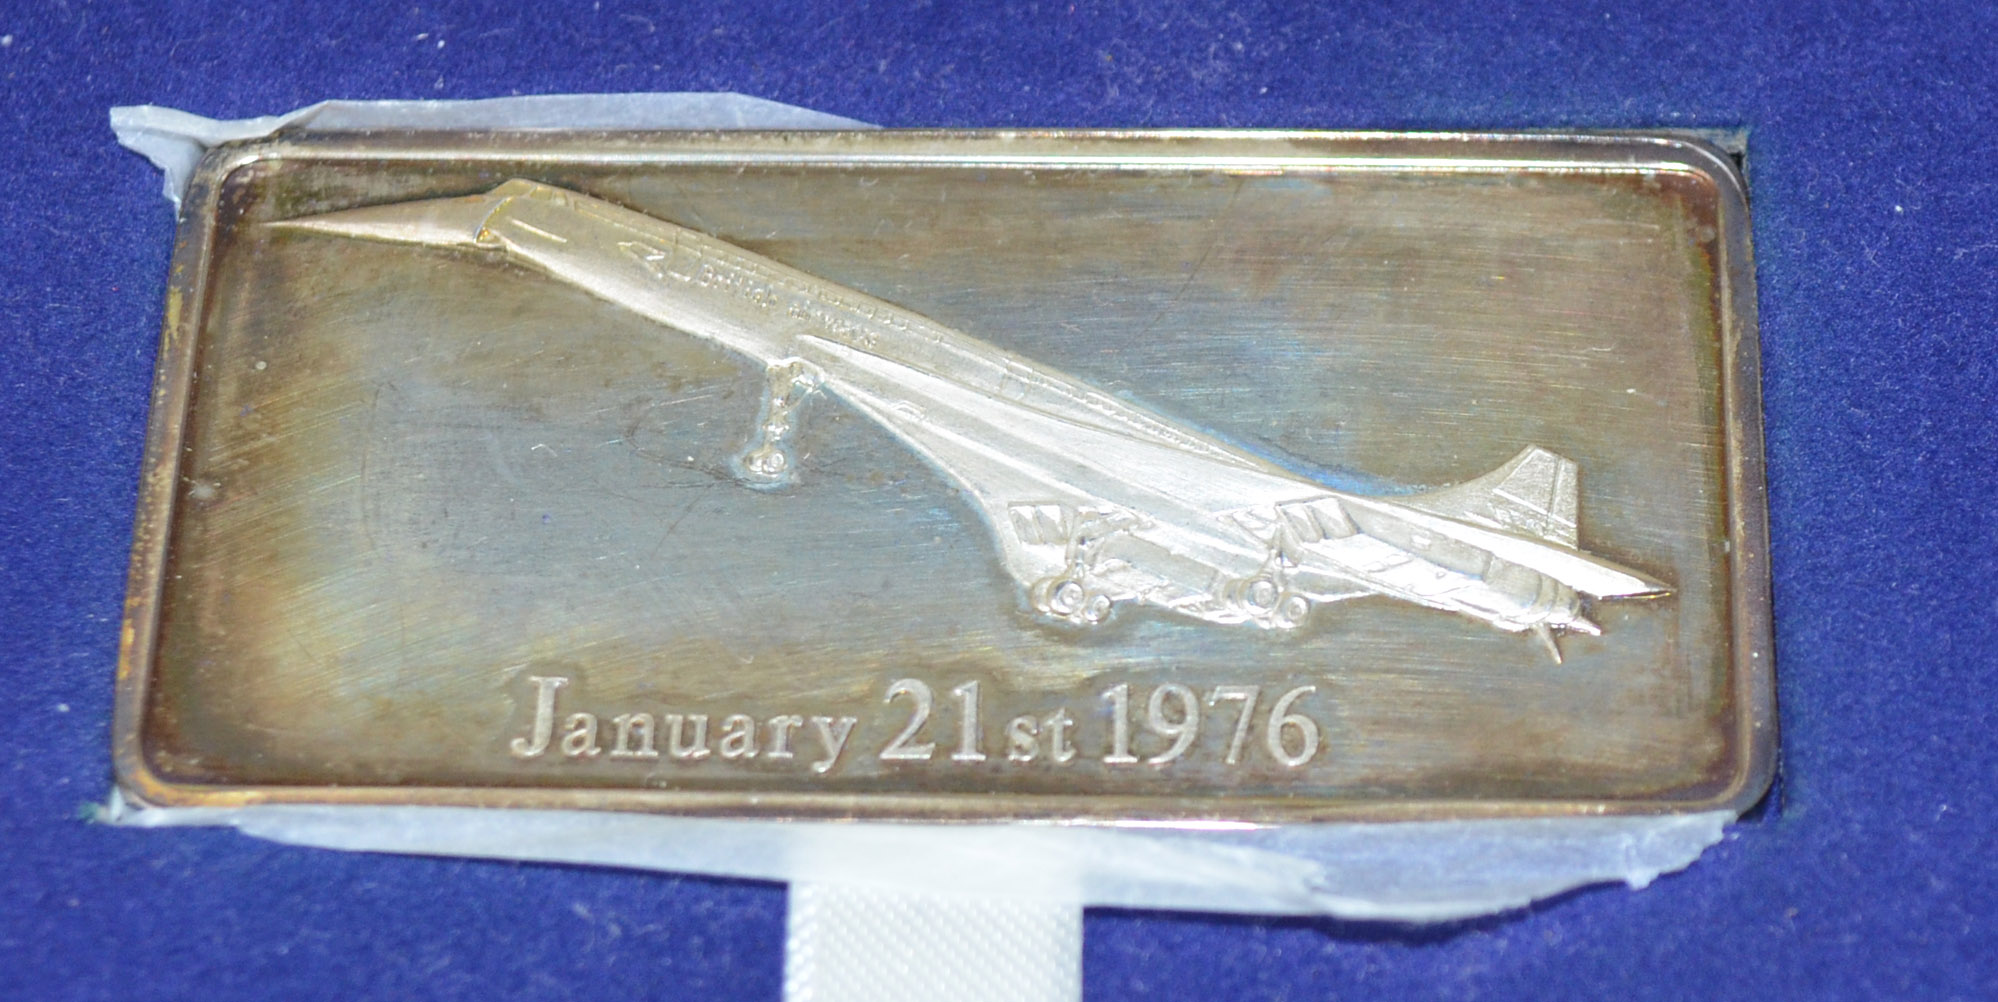 Danbury Mint white metal ingot commemorating the inaugural flight of Concorde. In case with